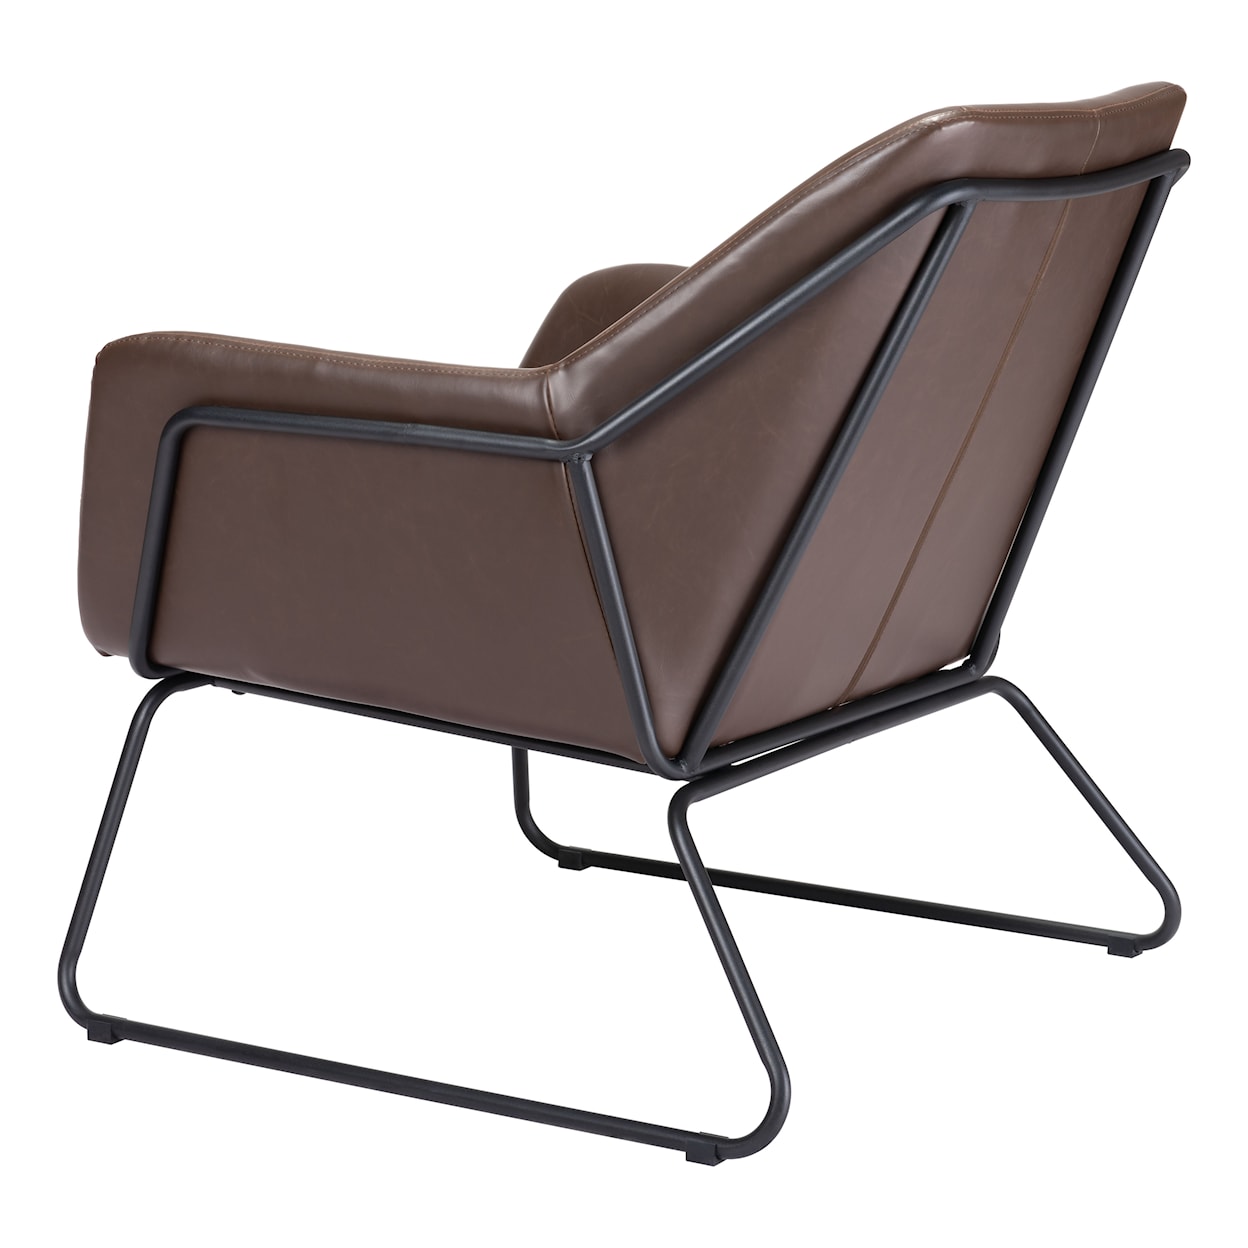 Zuo Jose Accent Chair